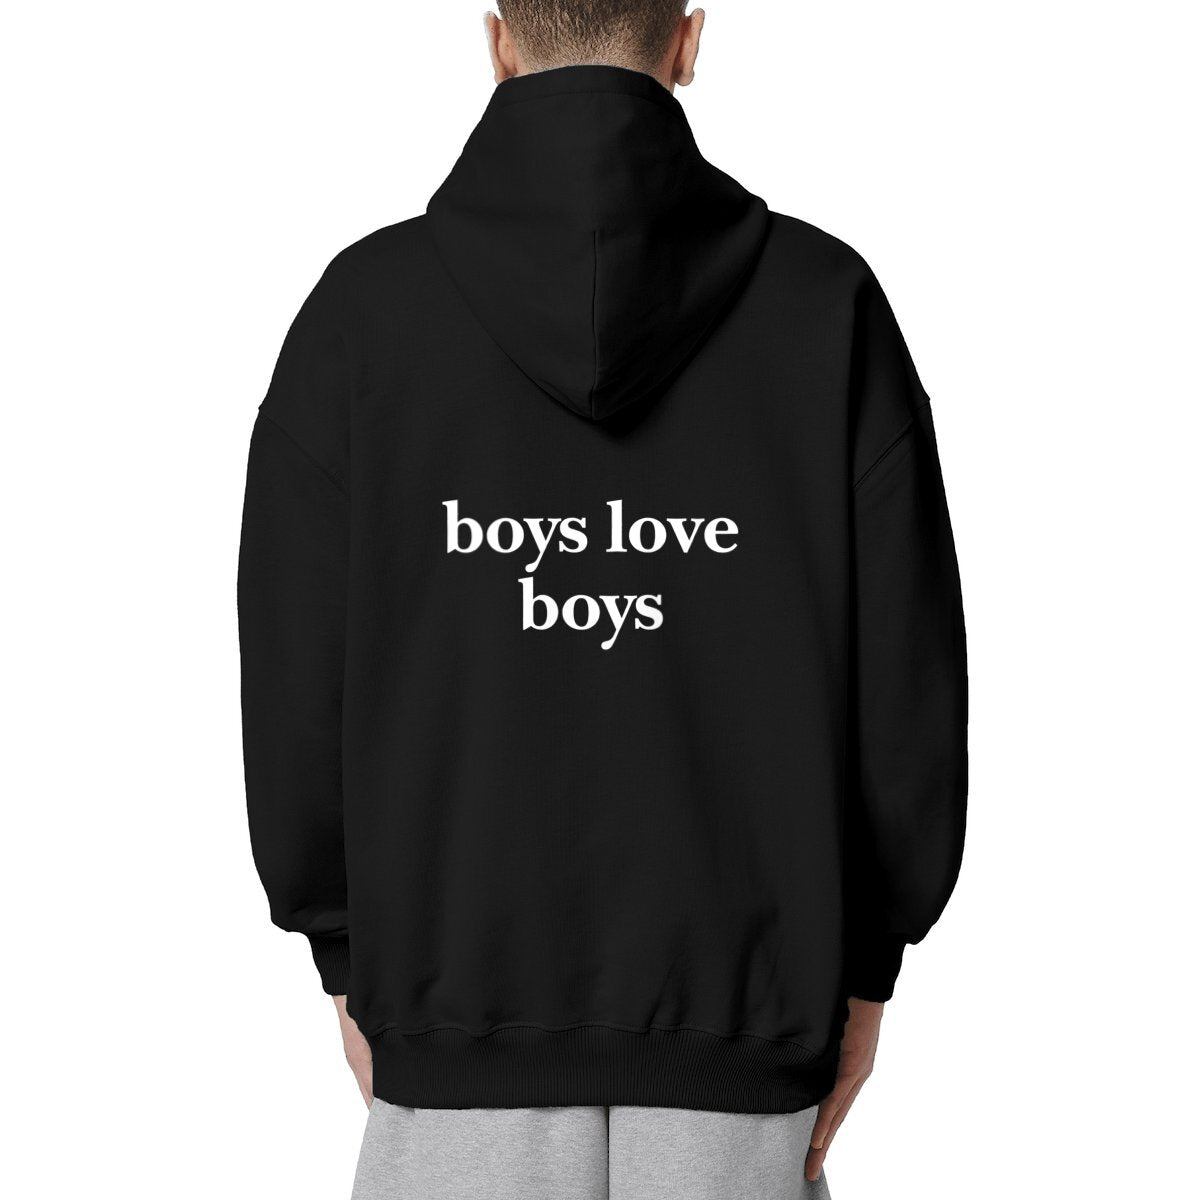 boys love boys hoodie over. garçon garçon essentiel black oversized hoodie. Encapsulate effortless Parisian cool with this hoodie, its subtle 'boys love boys ON THE BACK' emblem whispering understated sophistication. Crafted for comfort, styled for streets of Paris.